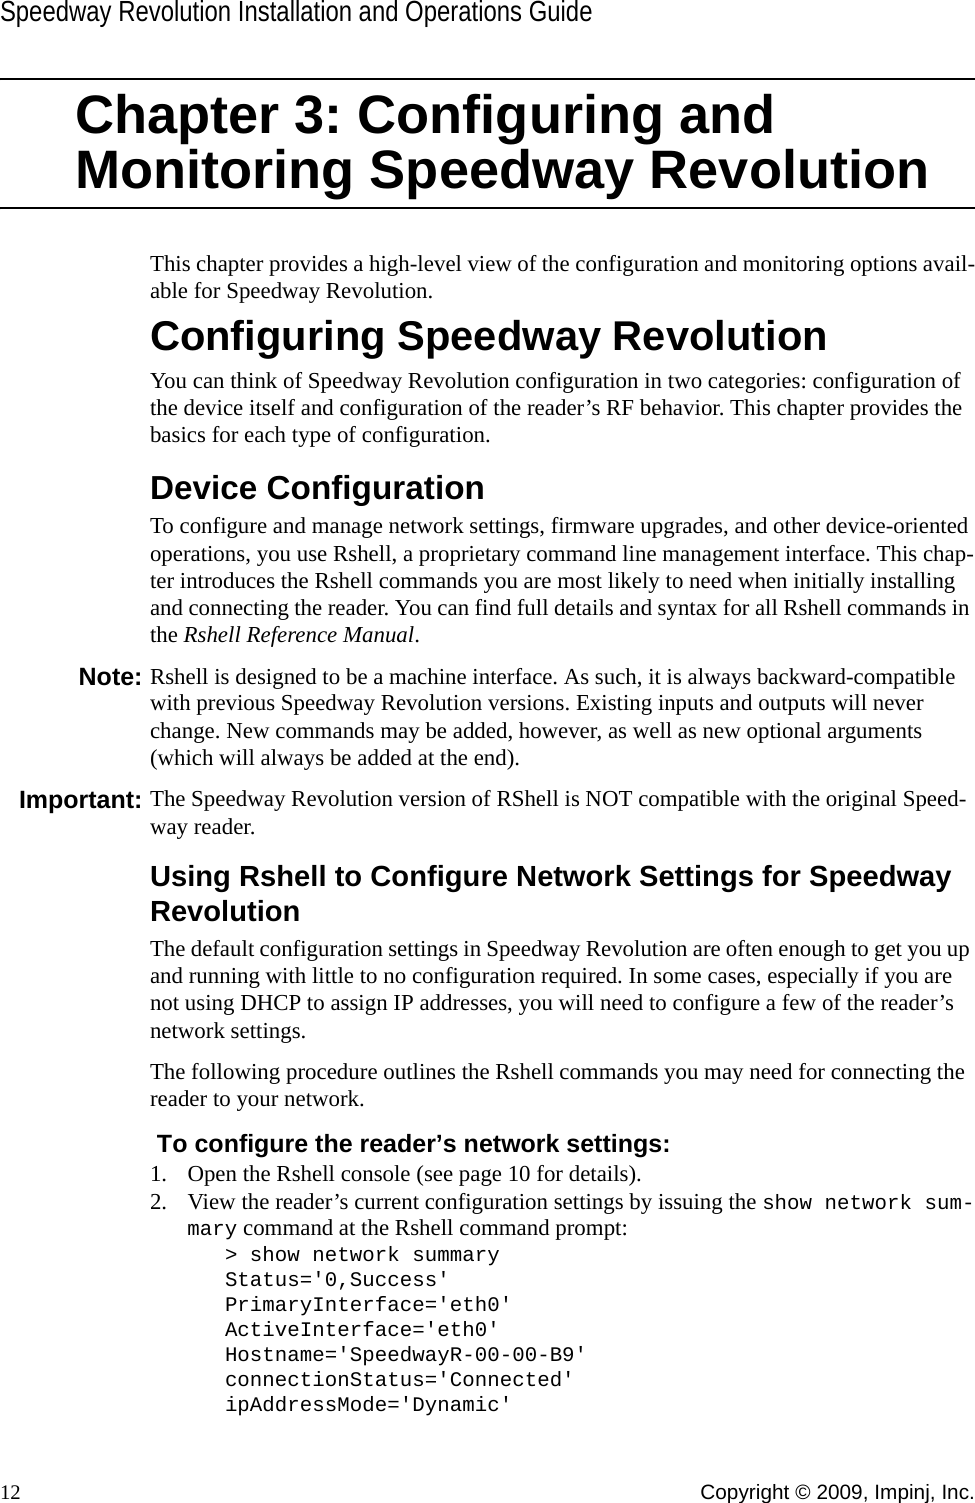 Speedway Revolution Installation and Operations Guide12 Copyright © 2009, Impinj, Inc.Chapter 3: Configuring and Monitoring Speedway RevolutionThis chapter provides a high-level view of the configuration and monitoring options avail-able for Speedway Revolution.Configuring Speedway RevolutionYou can think of Speedway Revolution configuration in two categories: configuration of the device itself and configuration of the reader’s RF behavior. This chapter provides the basics for each type of configuration.Device ConfigurationTo configure and manage network settings, firmware upgrades, and other device-oriented operations, you use Rshell, a proprietary command line management interface. This chap-ter introduces the Rshell commands you are most likely to need when initially installing and connecting the reader. You can find full details and syntax for all Rshell commands in the Rshell Reference Manual.Note: Rshell is designed to be a machine interface. As such, it is always backward-compatible with previous Speedway Revolution versions. Existing inputs and outputs will never change. New commands may be added, however, as well as new optional arguments (which will always be added at the end).Important: The Speedway Revolution version of RShell is NOT compatible with the original Speed-way reader.Using Rshell to Configure Network Settings for Speedway RevolutionThe default configuration settings in Speedway Revolution are often enough to get you up and running with little to no configuration required. In some cases, especially if you are not using DHCP to assign IP addresses, you will need to configure a few of the reader’s network settings.The following procedure outlines the Rshell commands you may need for connecting the reader to your network.  To configure the reader’s network settings:1. Open the Rshell console (see page 10 for details).2. View the reader’s current configuration settings by issuing the show network sum-mary command at the Rshell command prompt:&gt; show network summaryStatus=&apos;0,Success&apos;PrimaryInterface=&apos;eth0&apos;ActiveInterface=&apos;eth0&apos;Hostname=&apos;SpeedwayR-00-00-B9&apos;connectionStatus=&apos;Connected&apos;ipAddressMode=&apos;Dynamic&apos;